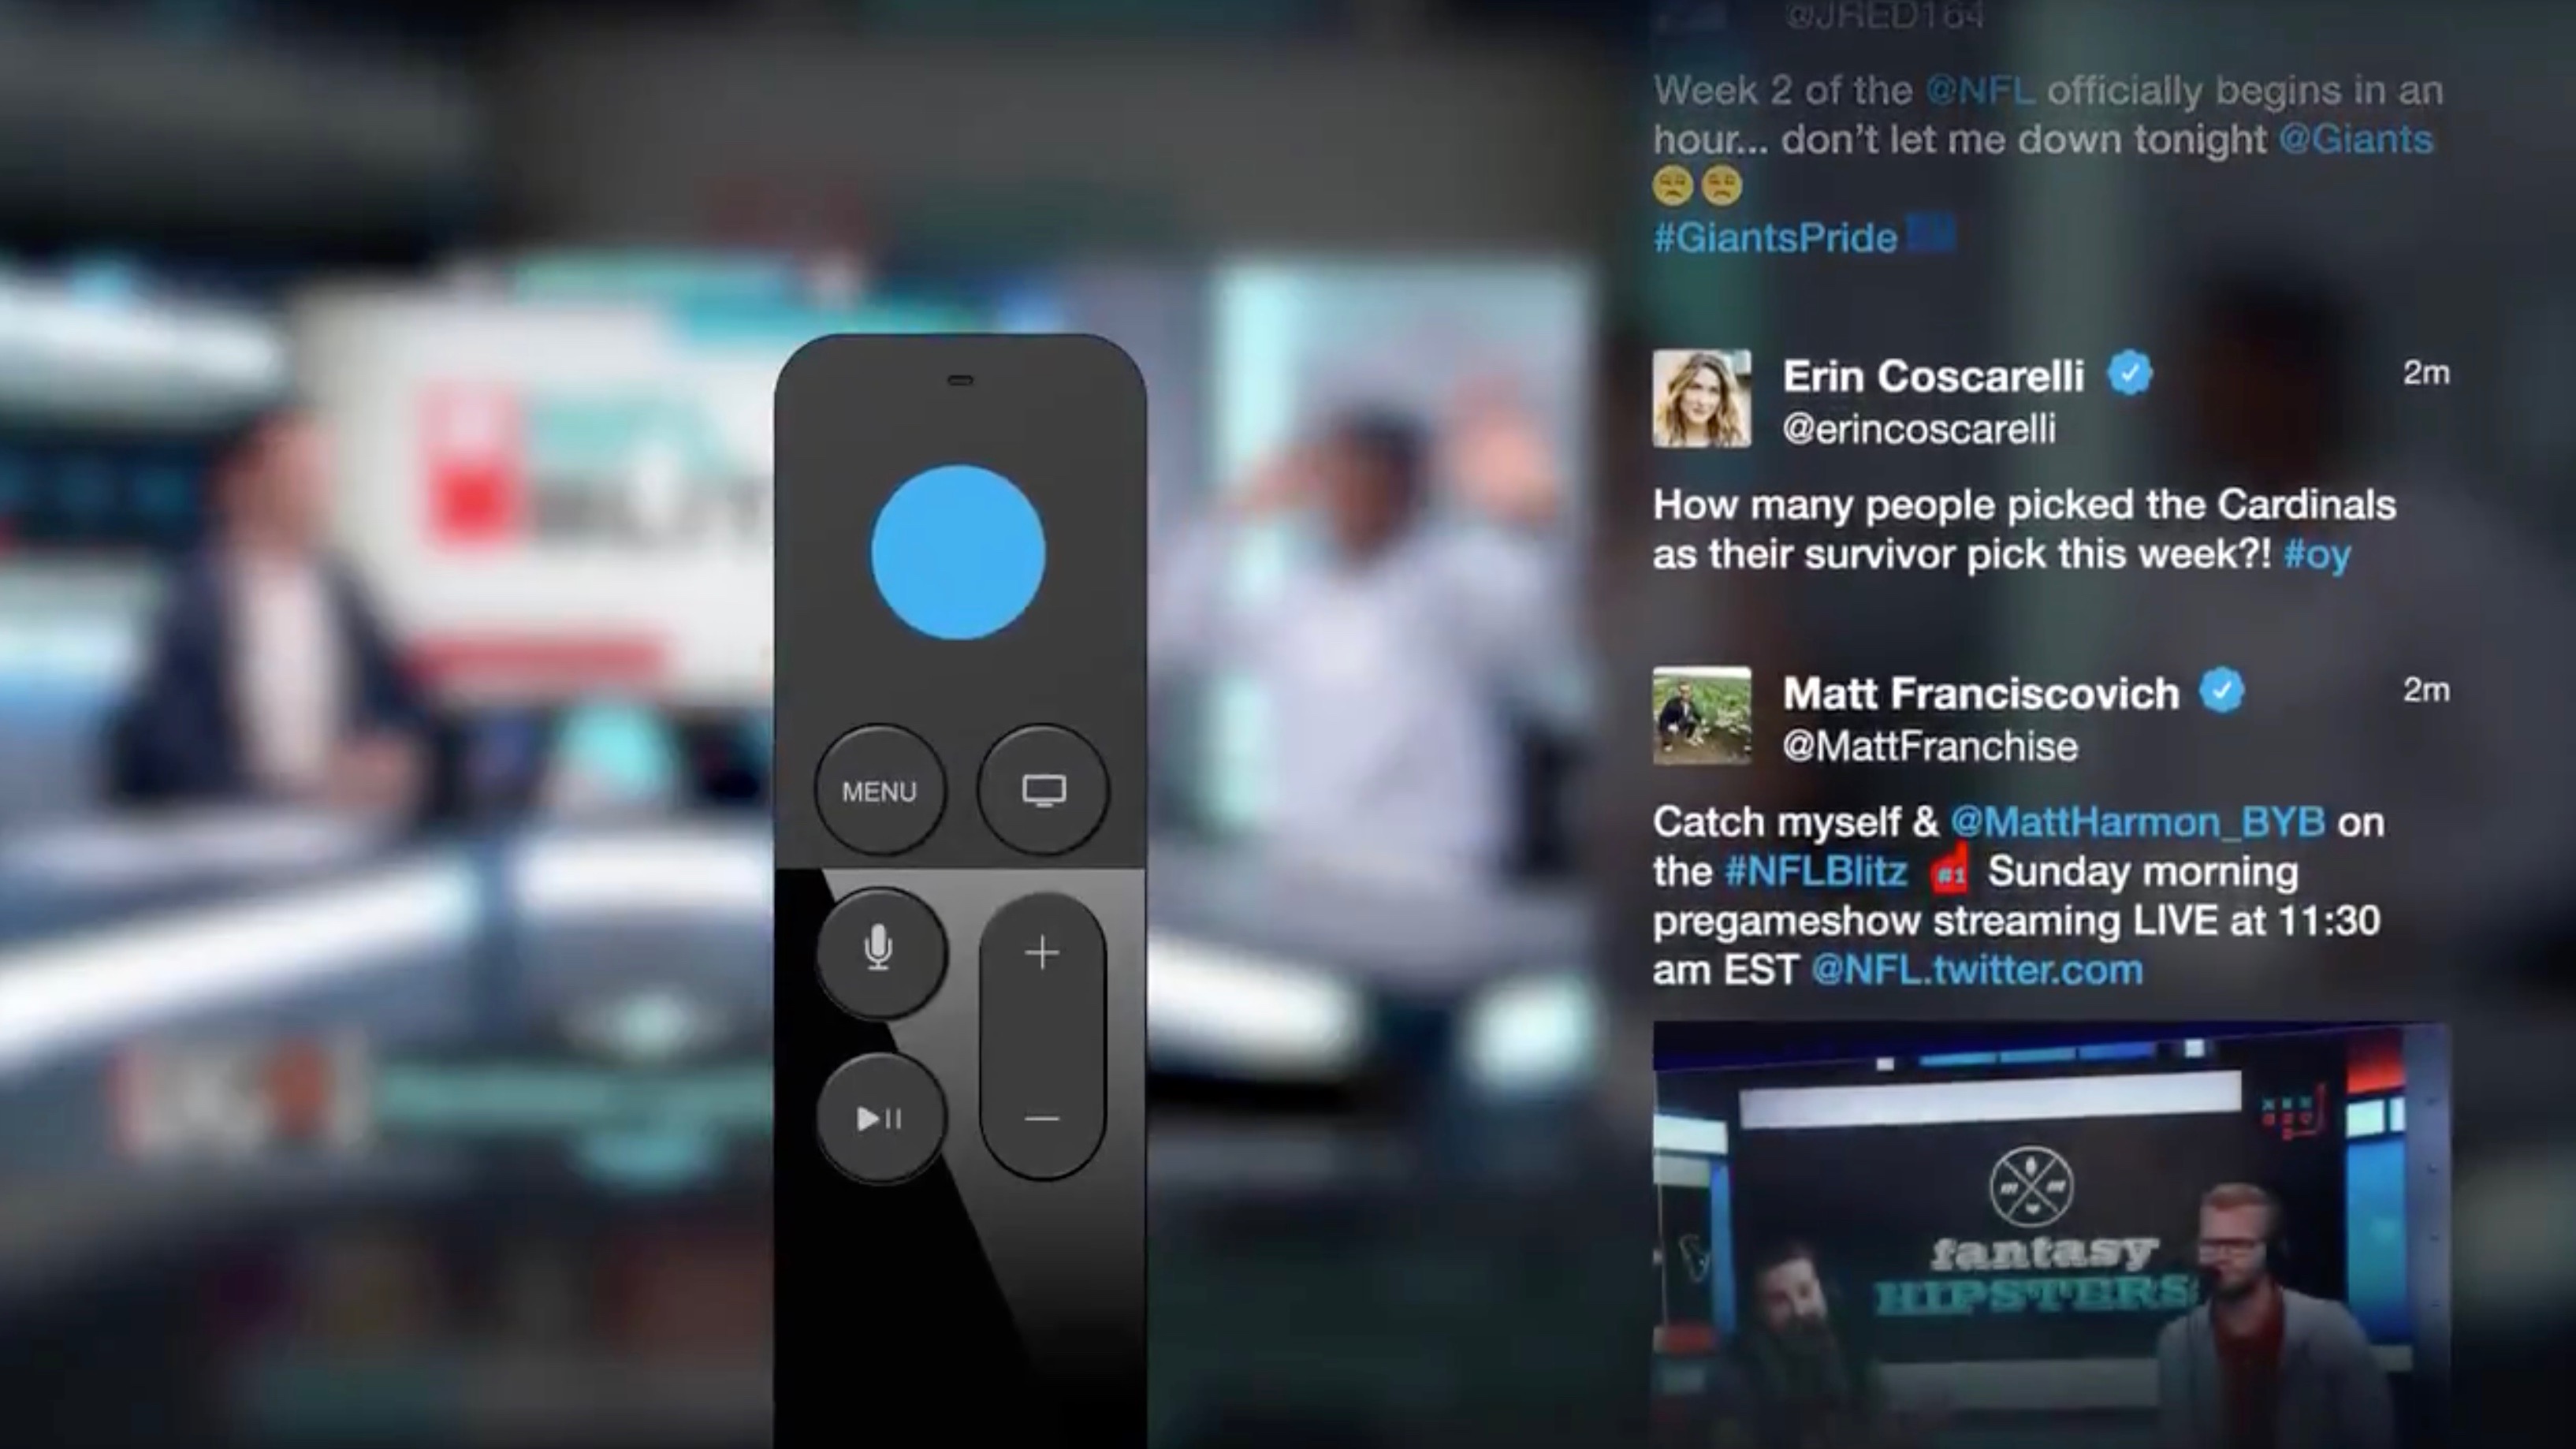 Twitter Updates Tvos App With New Ios Integration To Easily Tweet While Watching Apple Tv 9to5mac